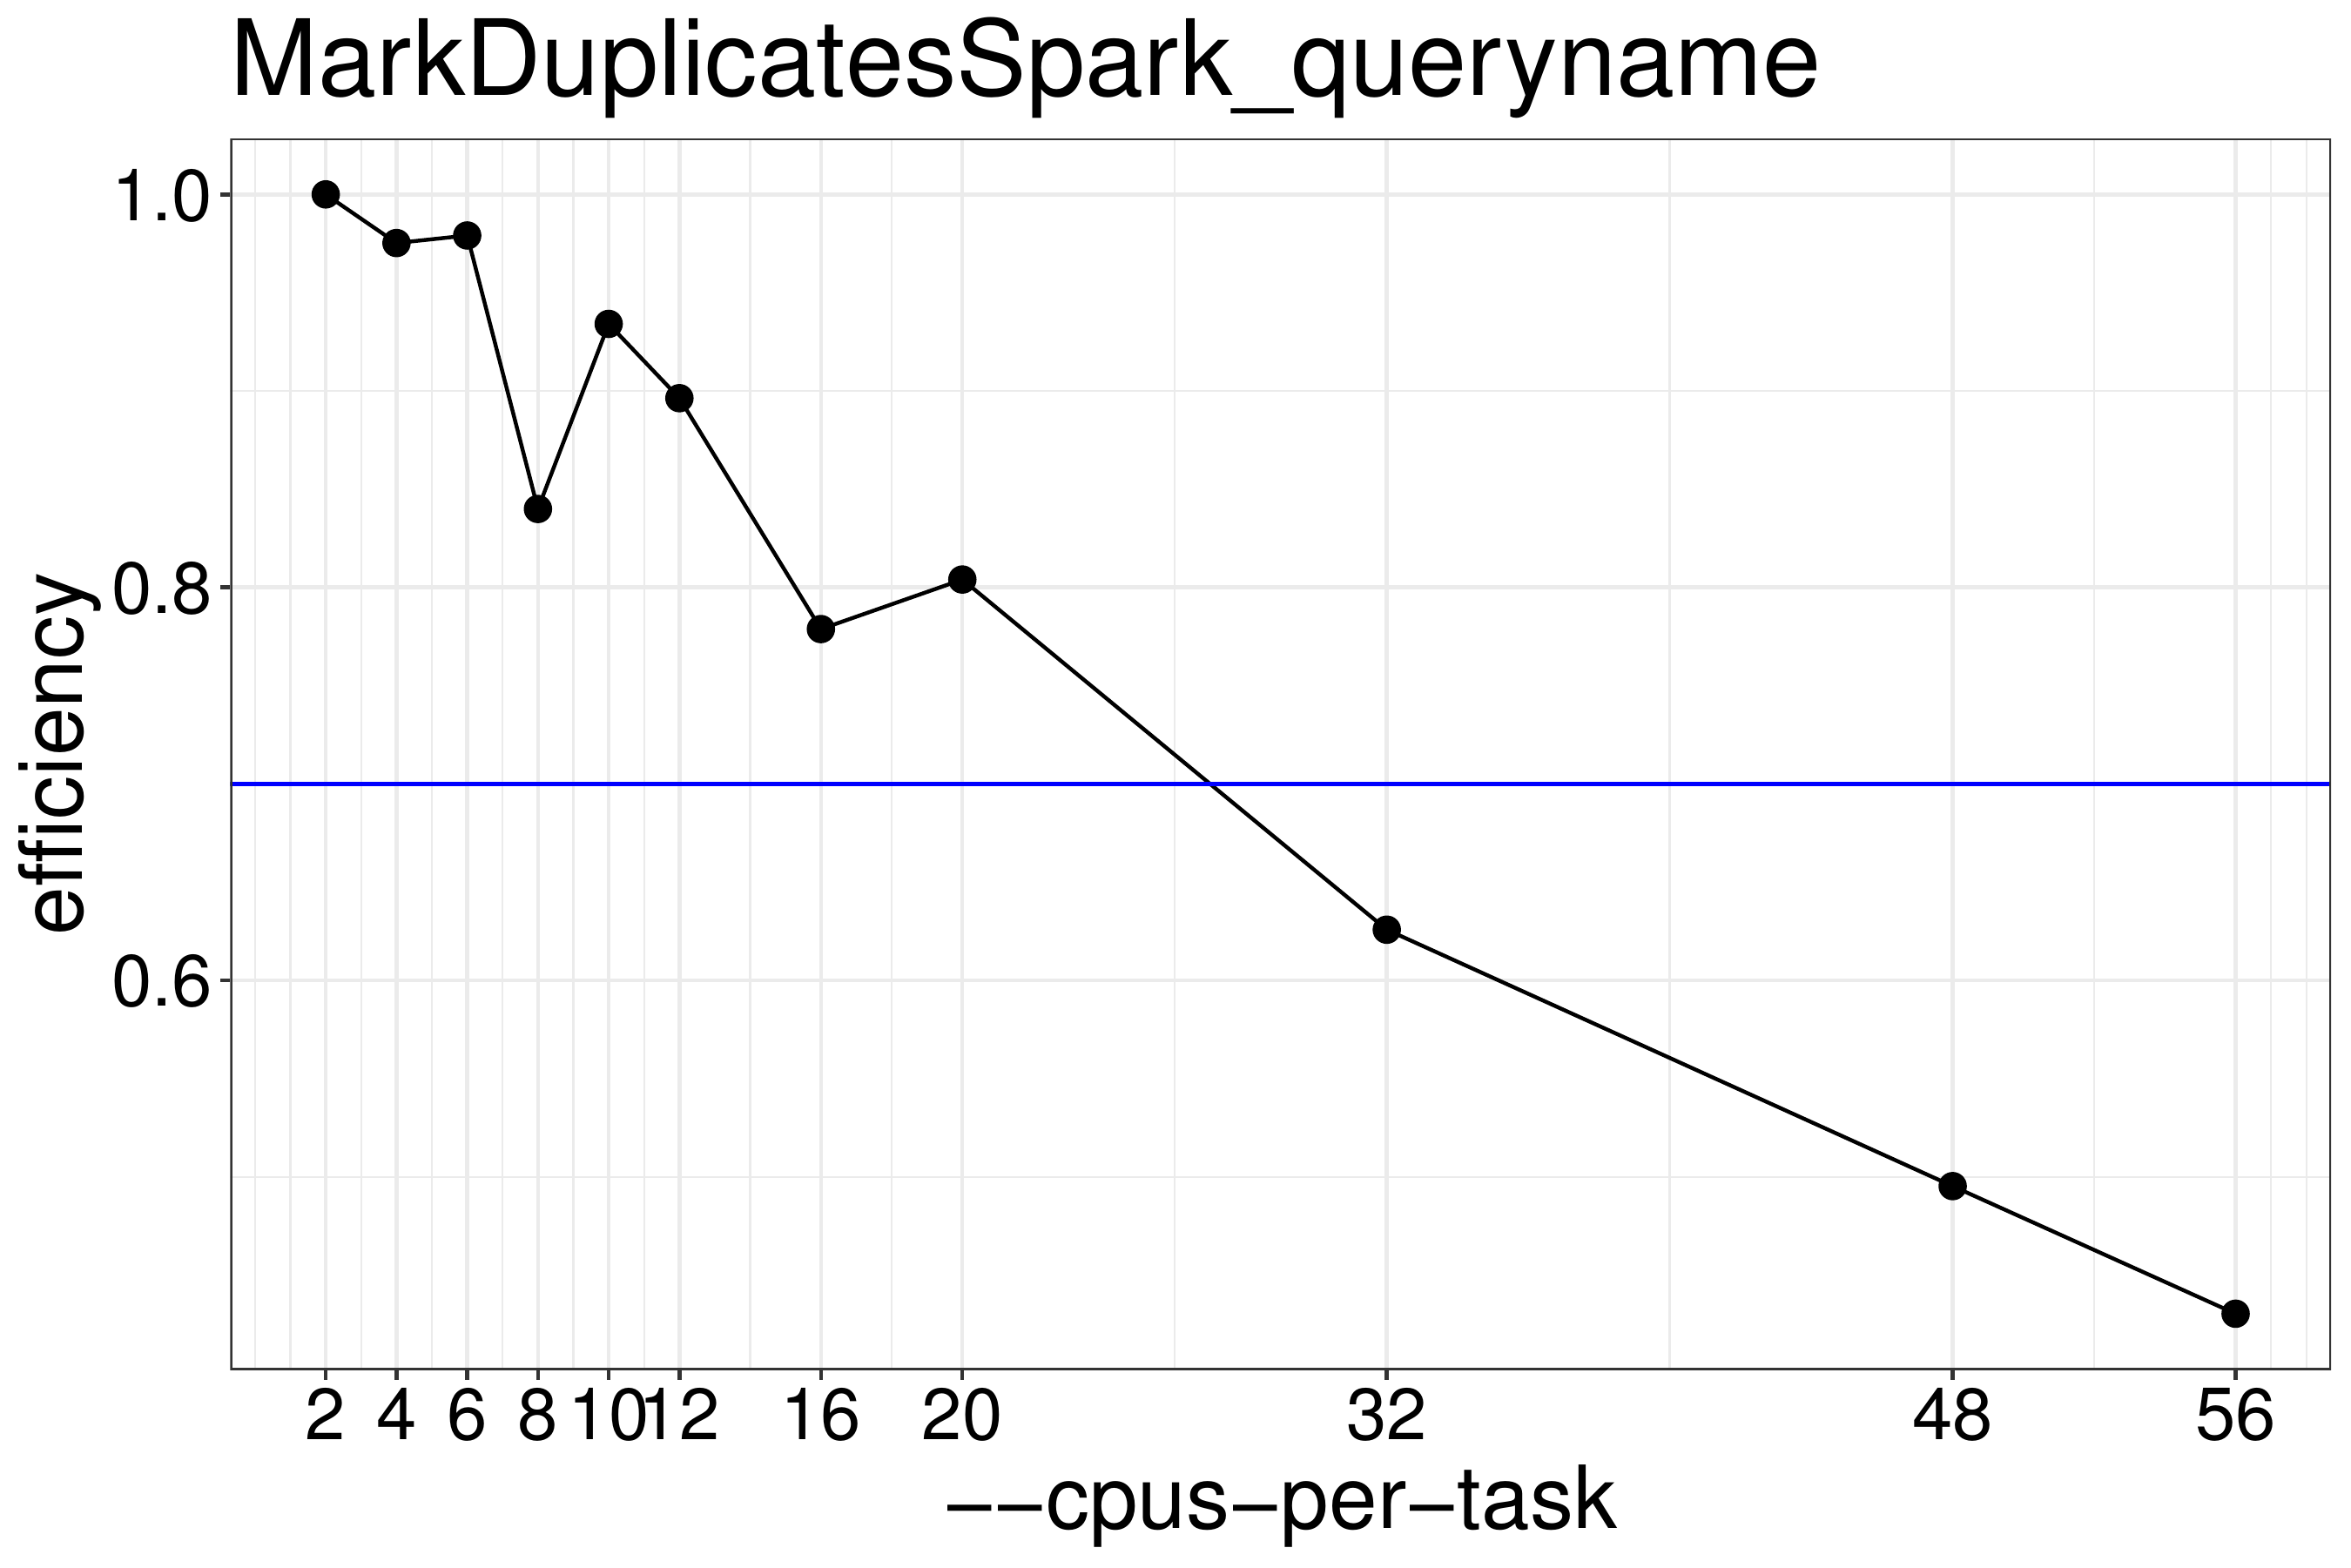 MarkDuplicatesSpark efficiency for queryname-grouped input data. For good efficiency no more than 20 threads should be run.